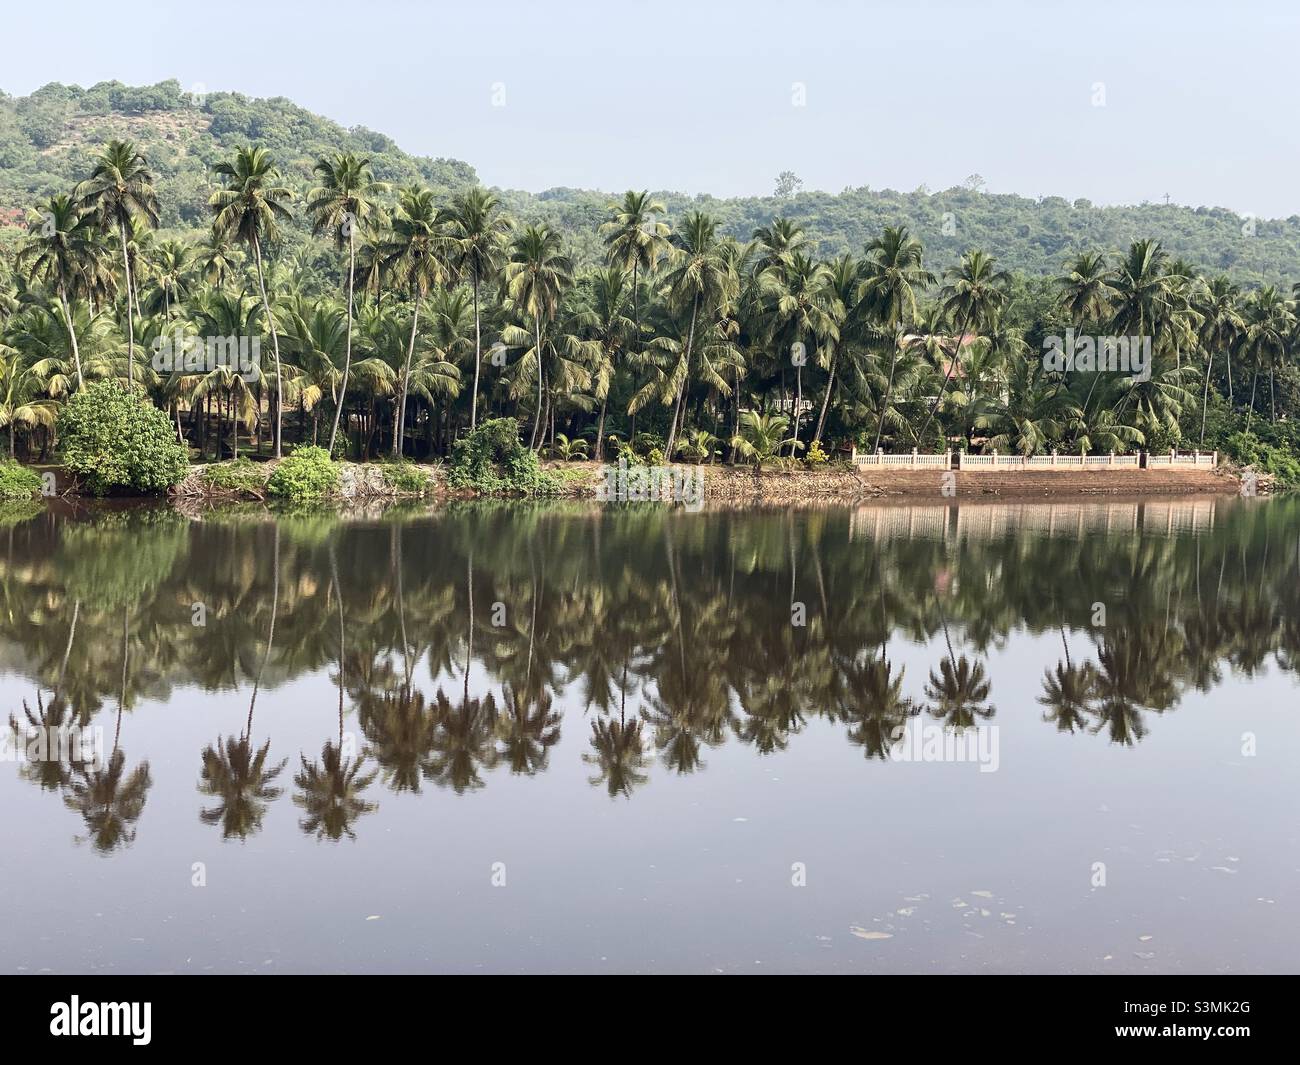 Reflection of coconut trees in a river Stock Photo